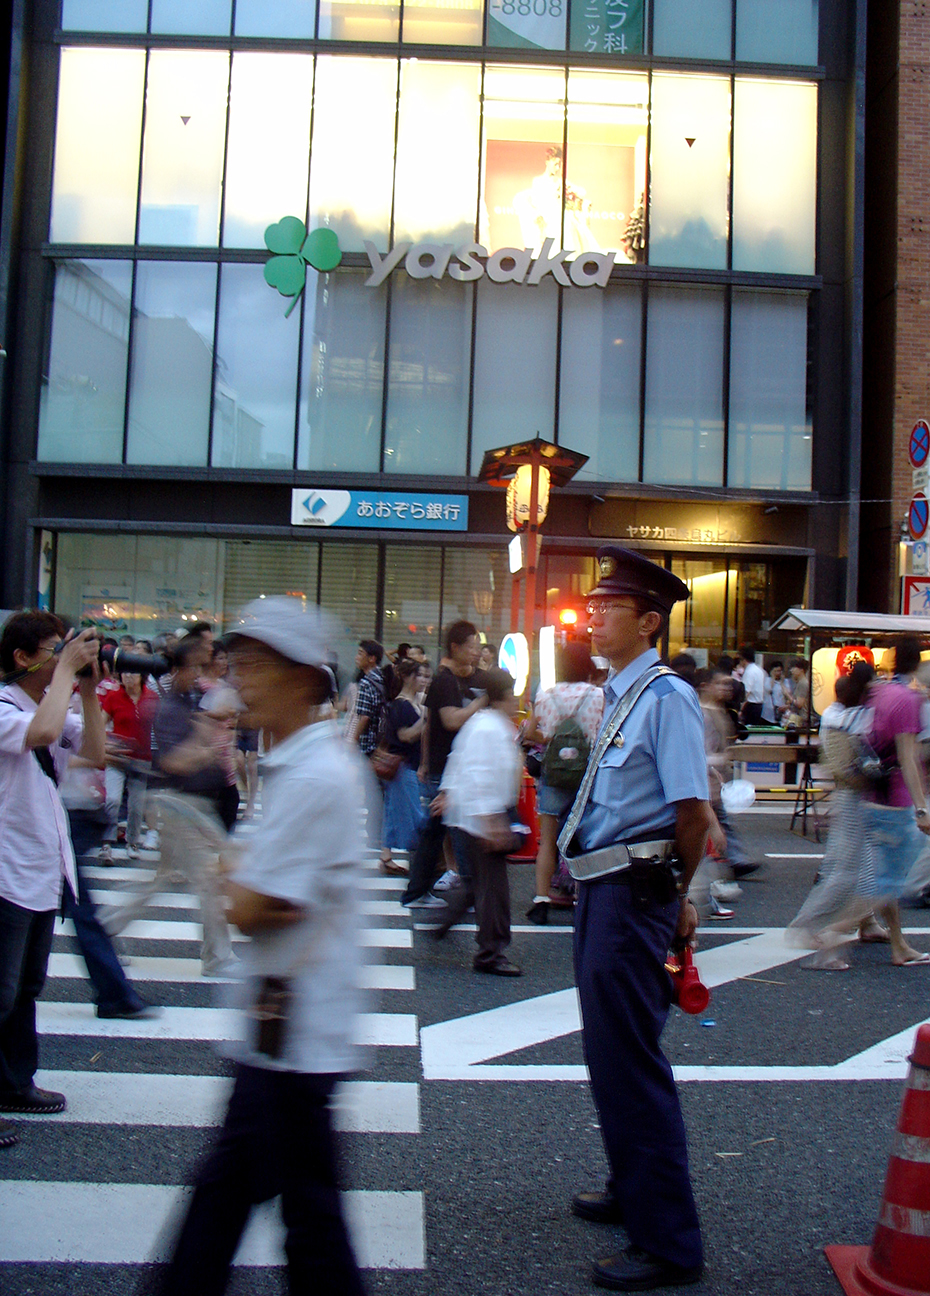 A police man observing the street